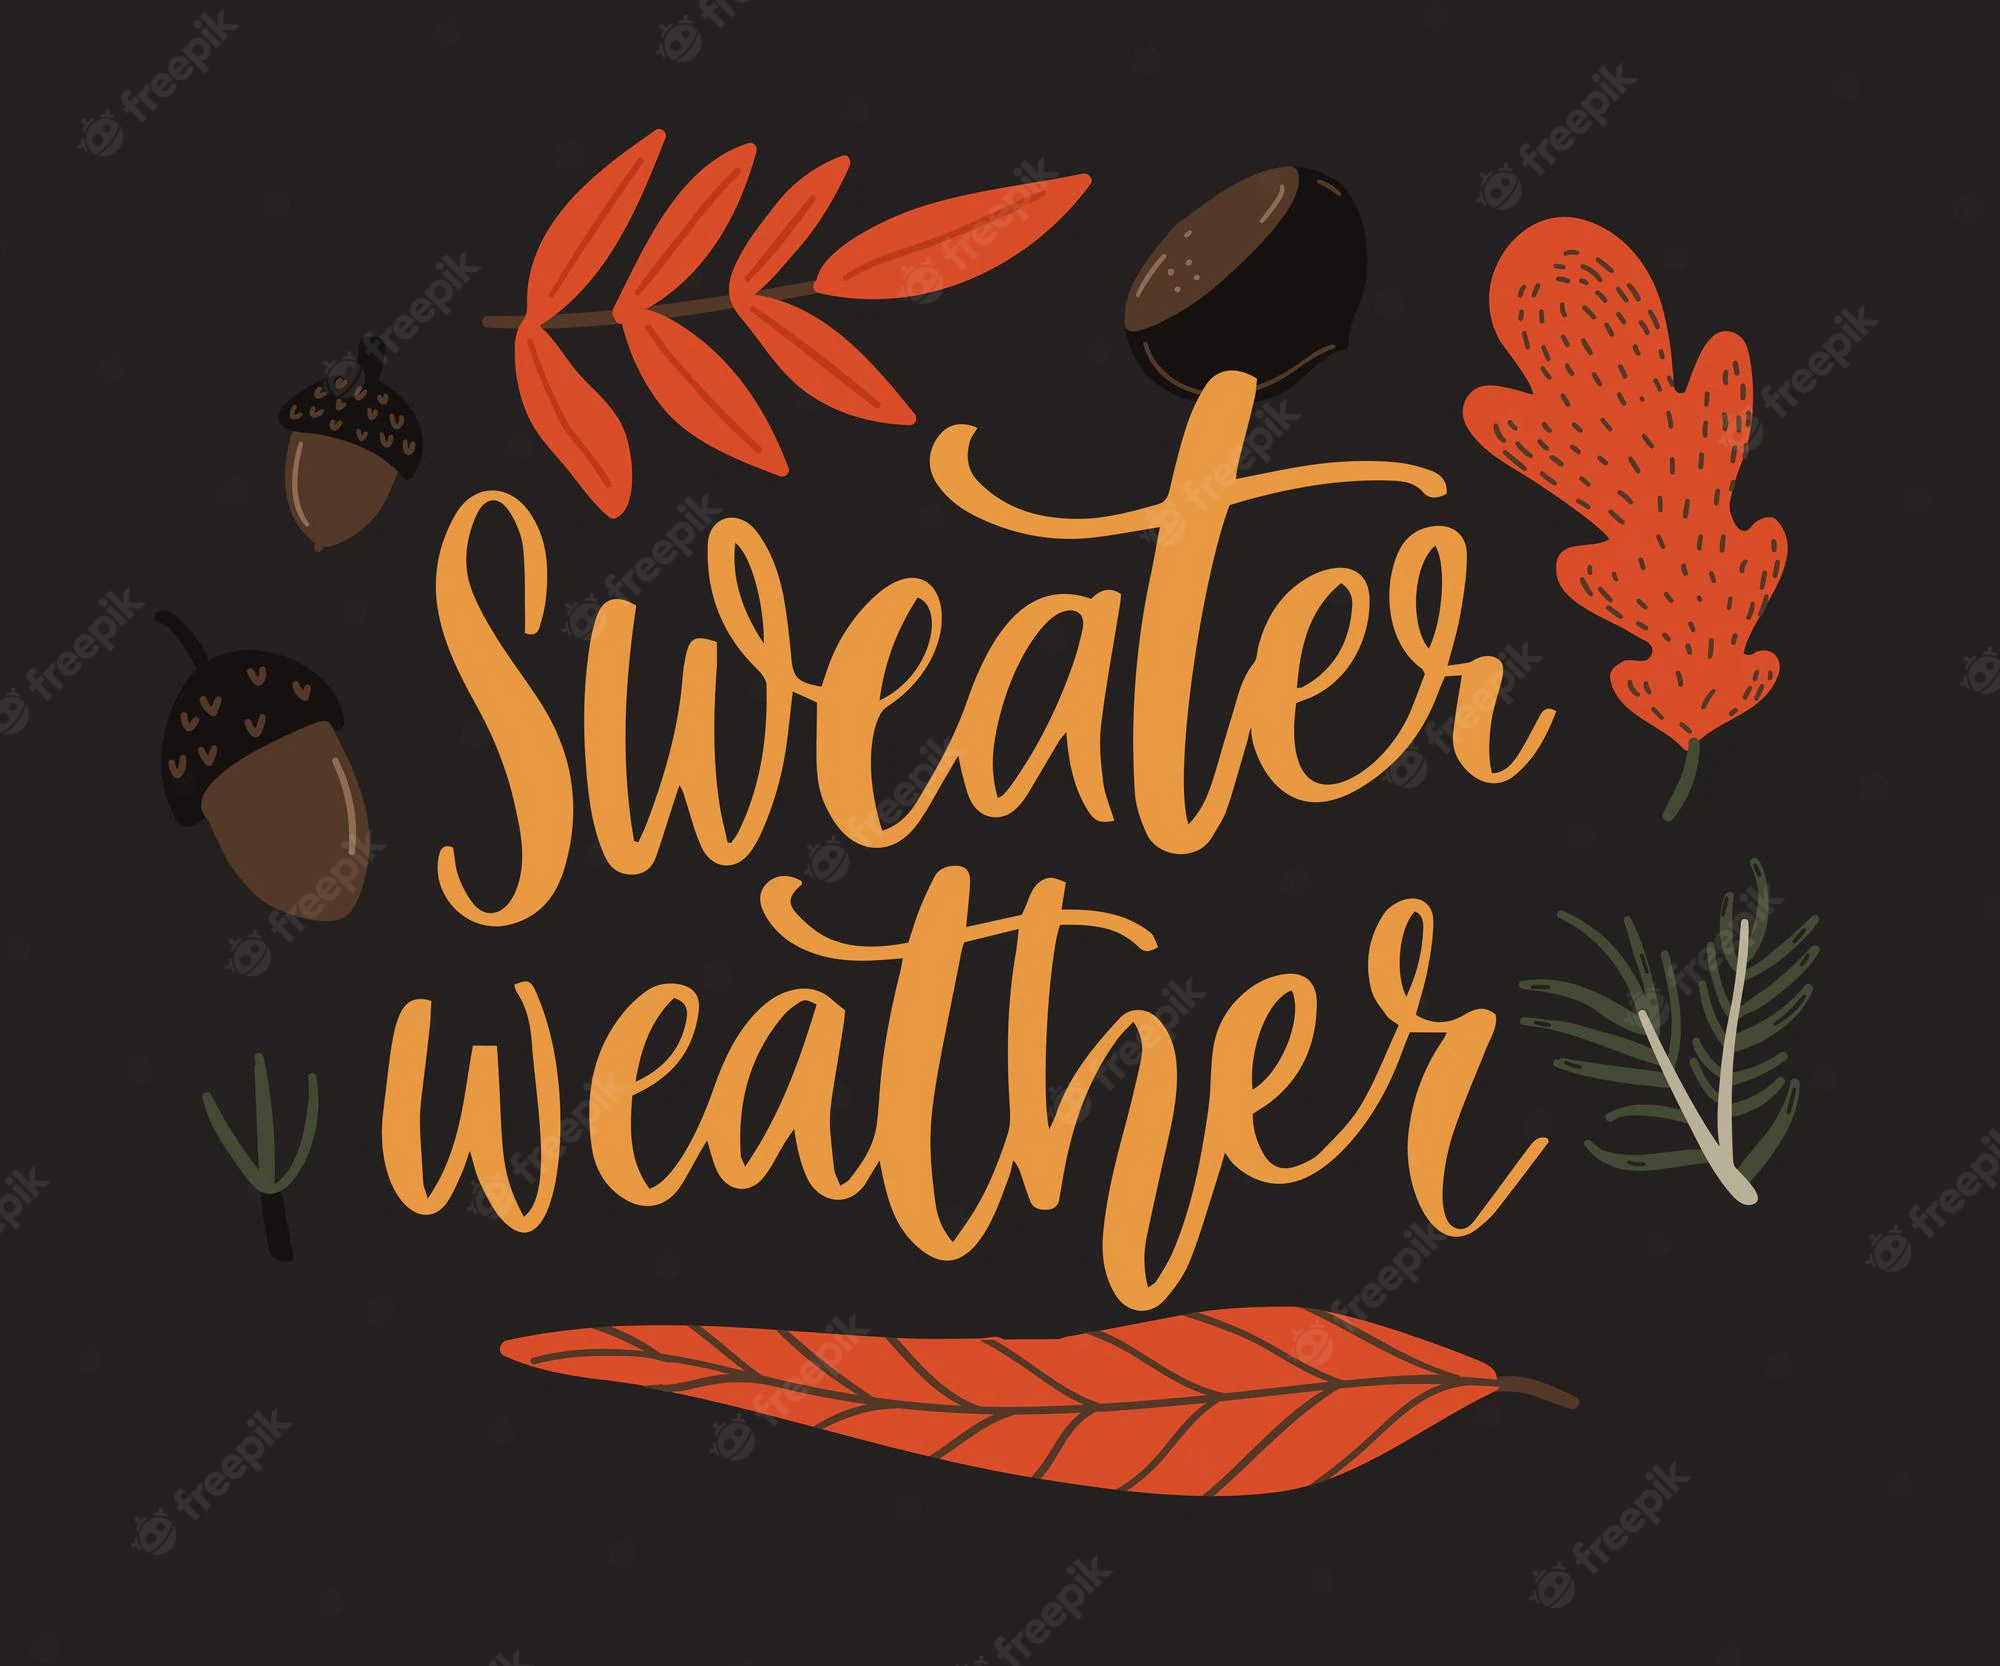 sweater-weather-inspirational-autumn-quote-fall-leaves-corns_511660-347